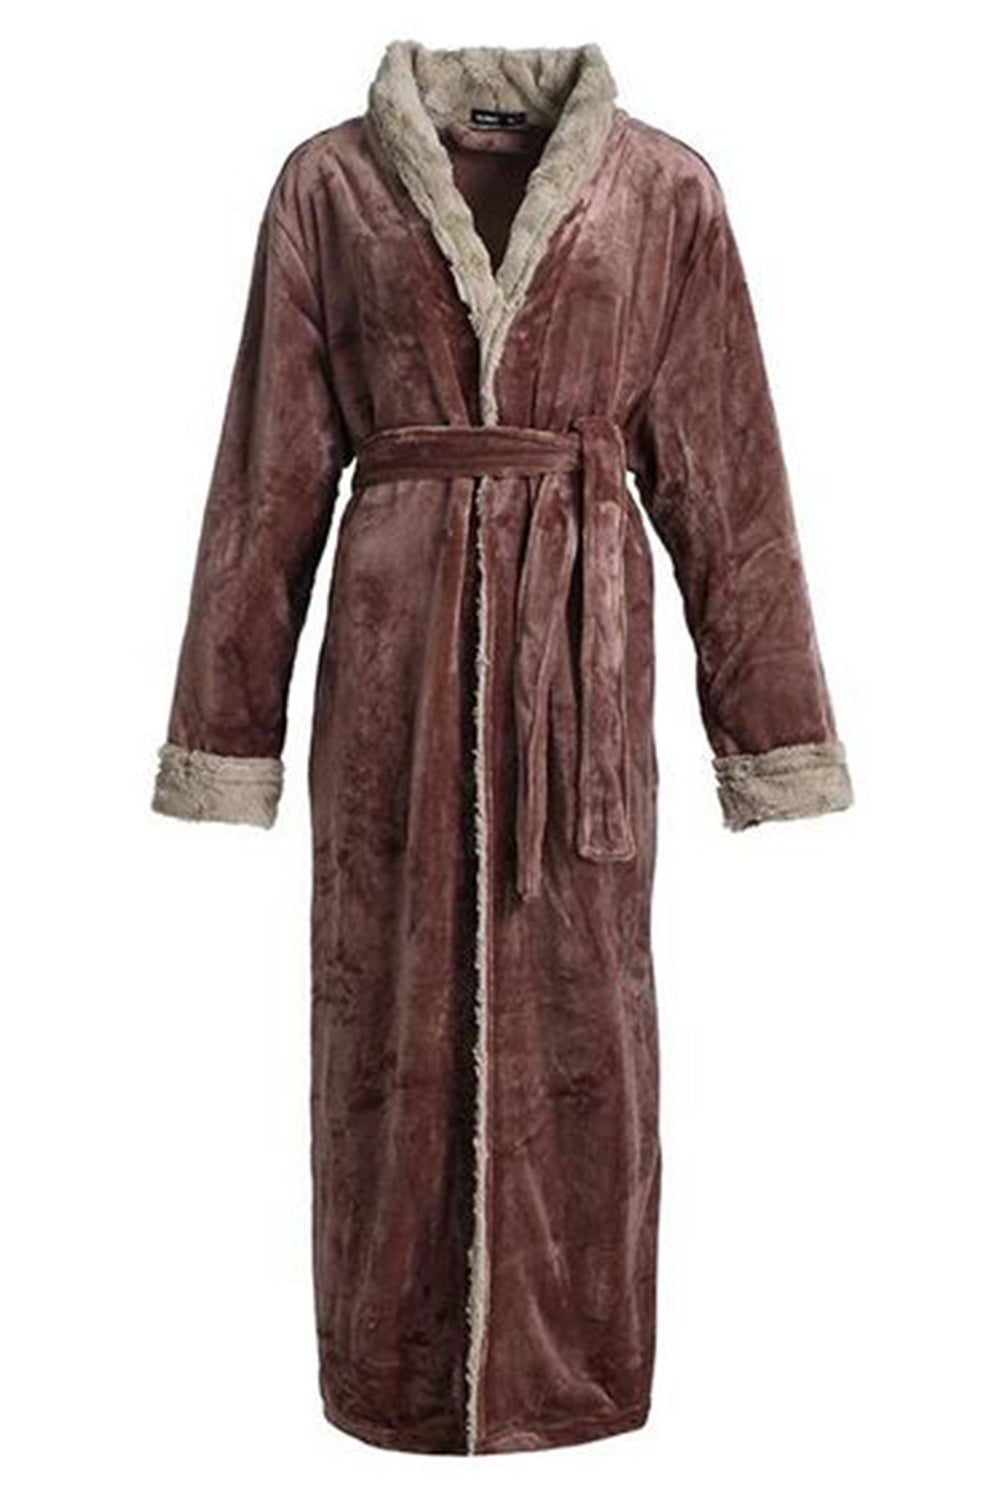 LC453040-17-M, LC453040-17-L, LC453040-17-XL, Brown Women's Solid Color Long Sleeve V Neck House Sleepwear Loungewear Bathrobe With Belt